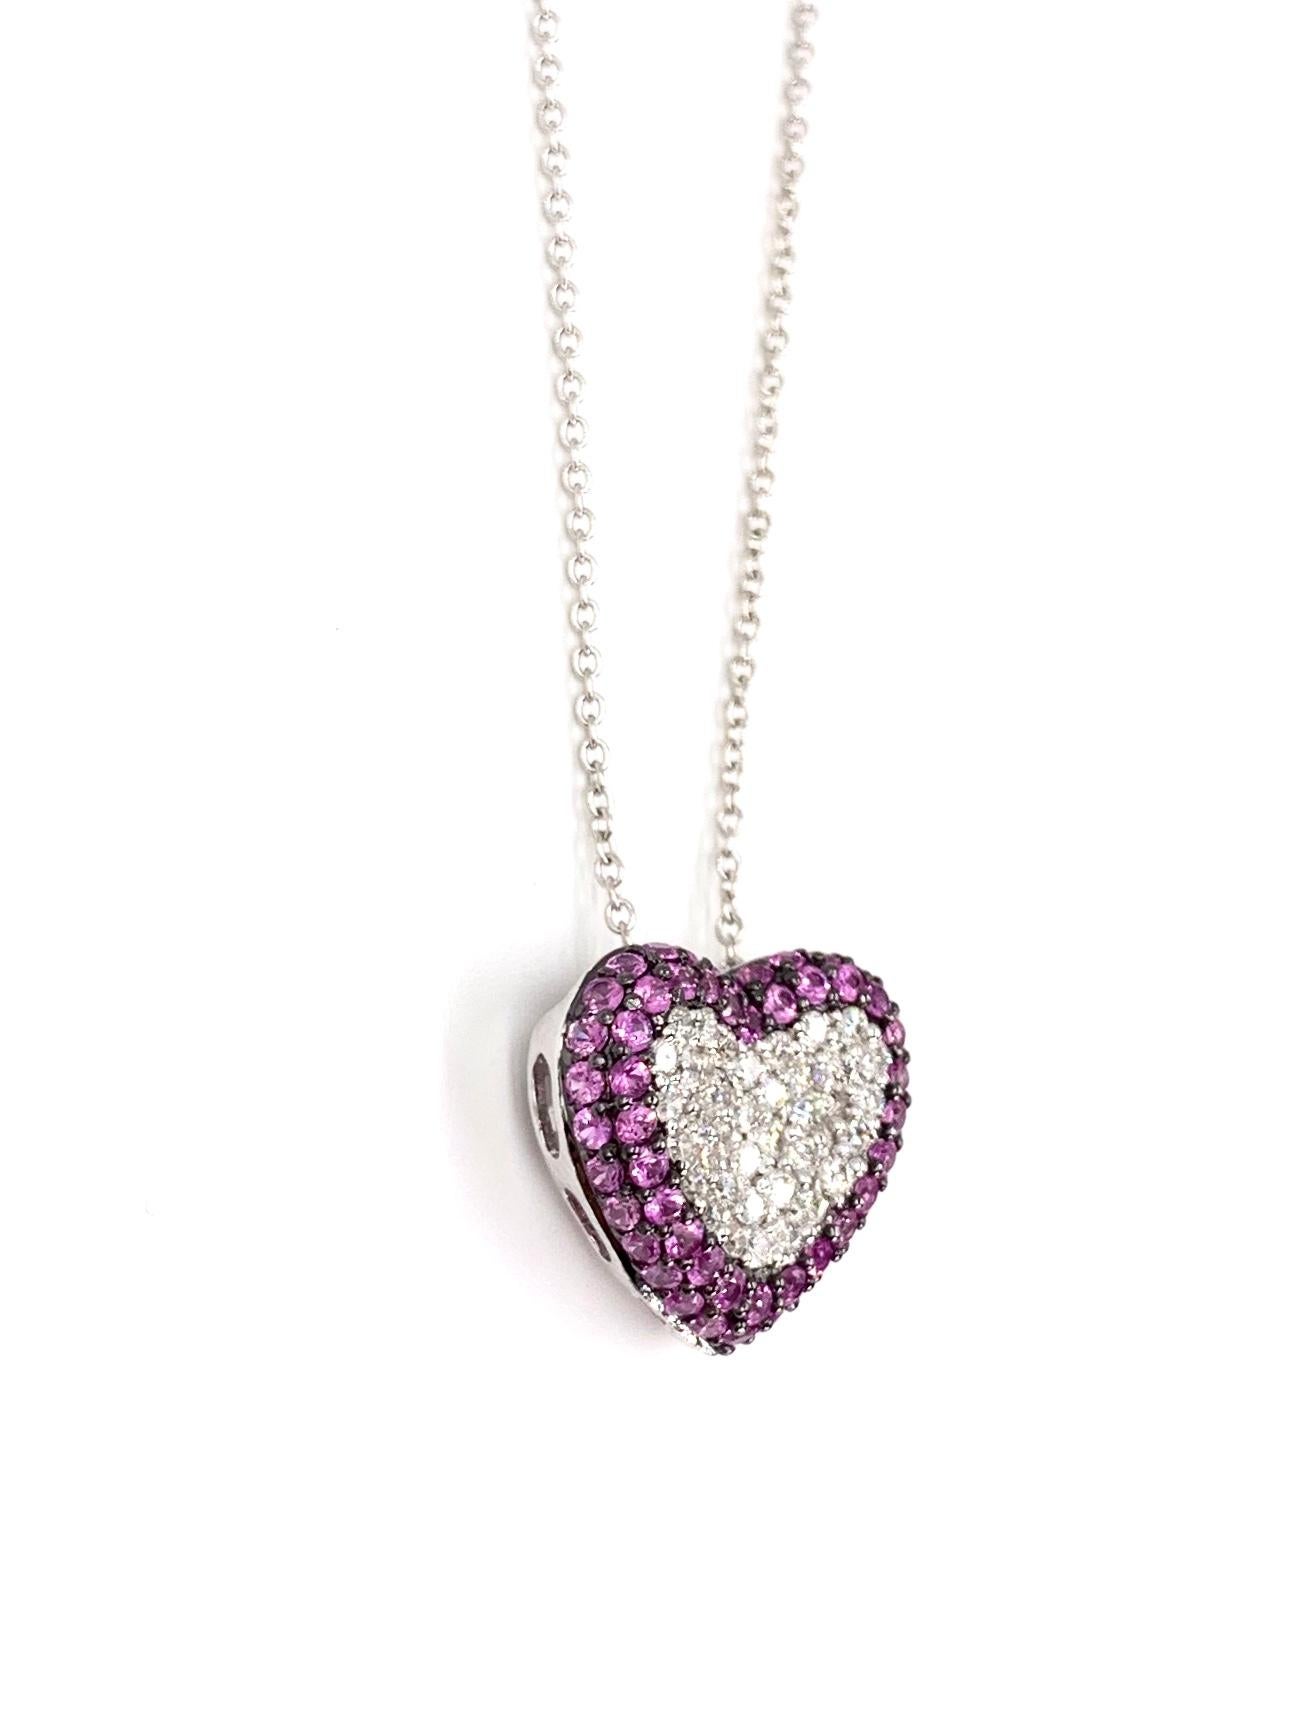 A 14 karat white gold puffed heart slide pendant is adorned with expertly pavé set round brilliant white diamond and vivid pink sapphires. Approximate diamond total weight is .50 carat at approximately G color, VS2 clarity surrounded by two rows of